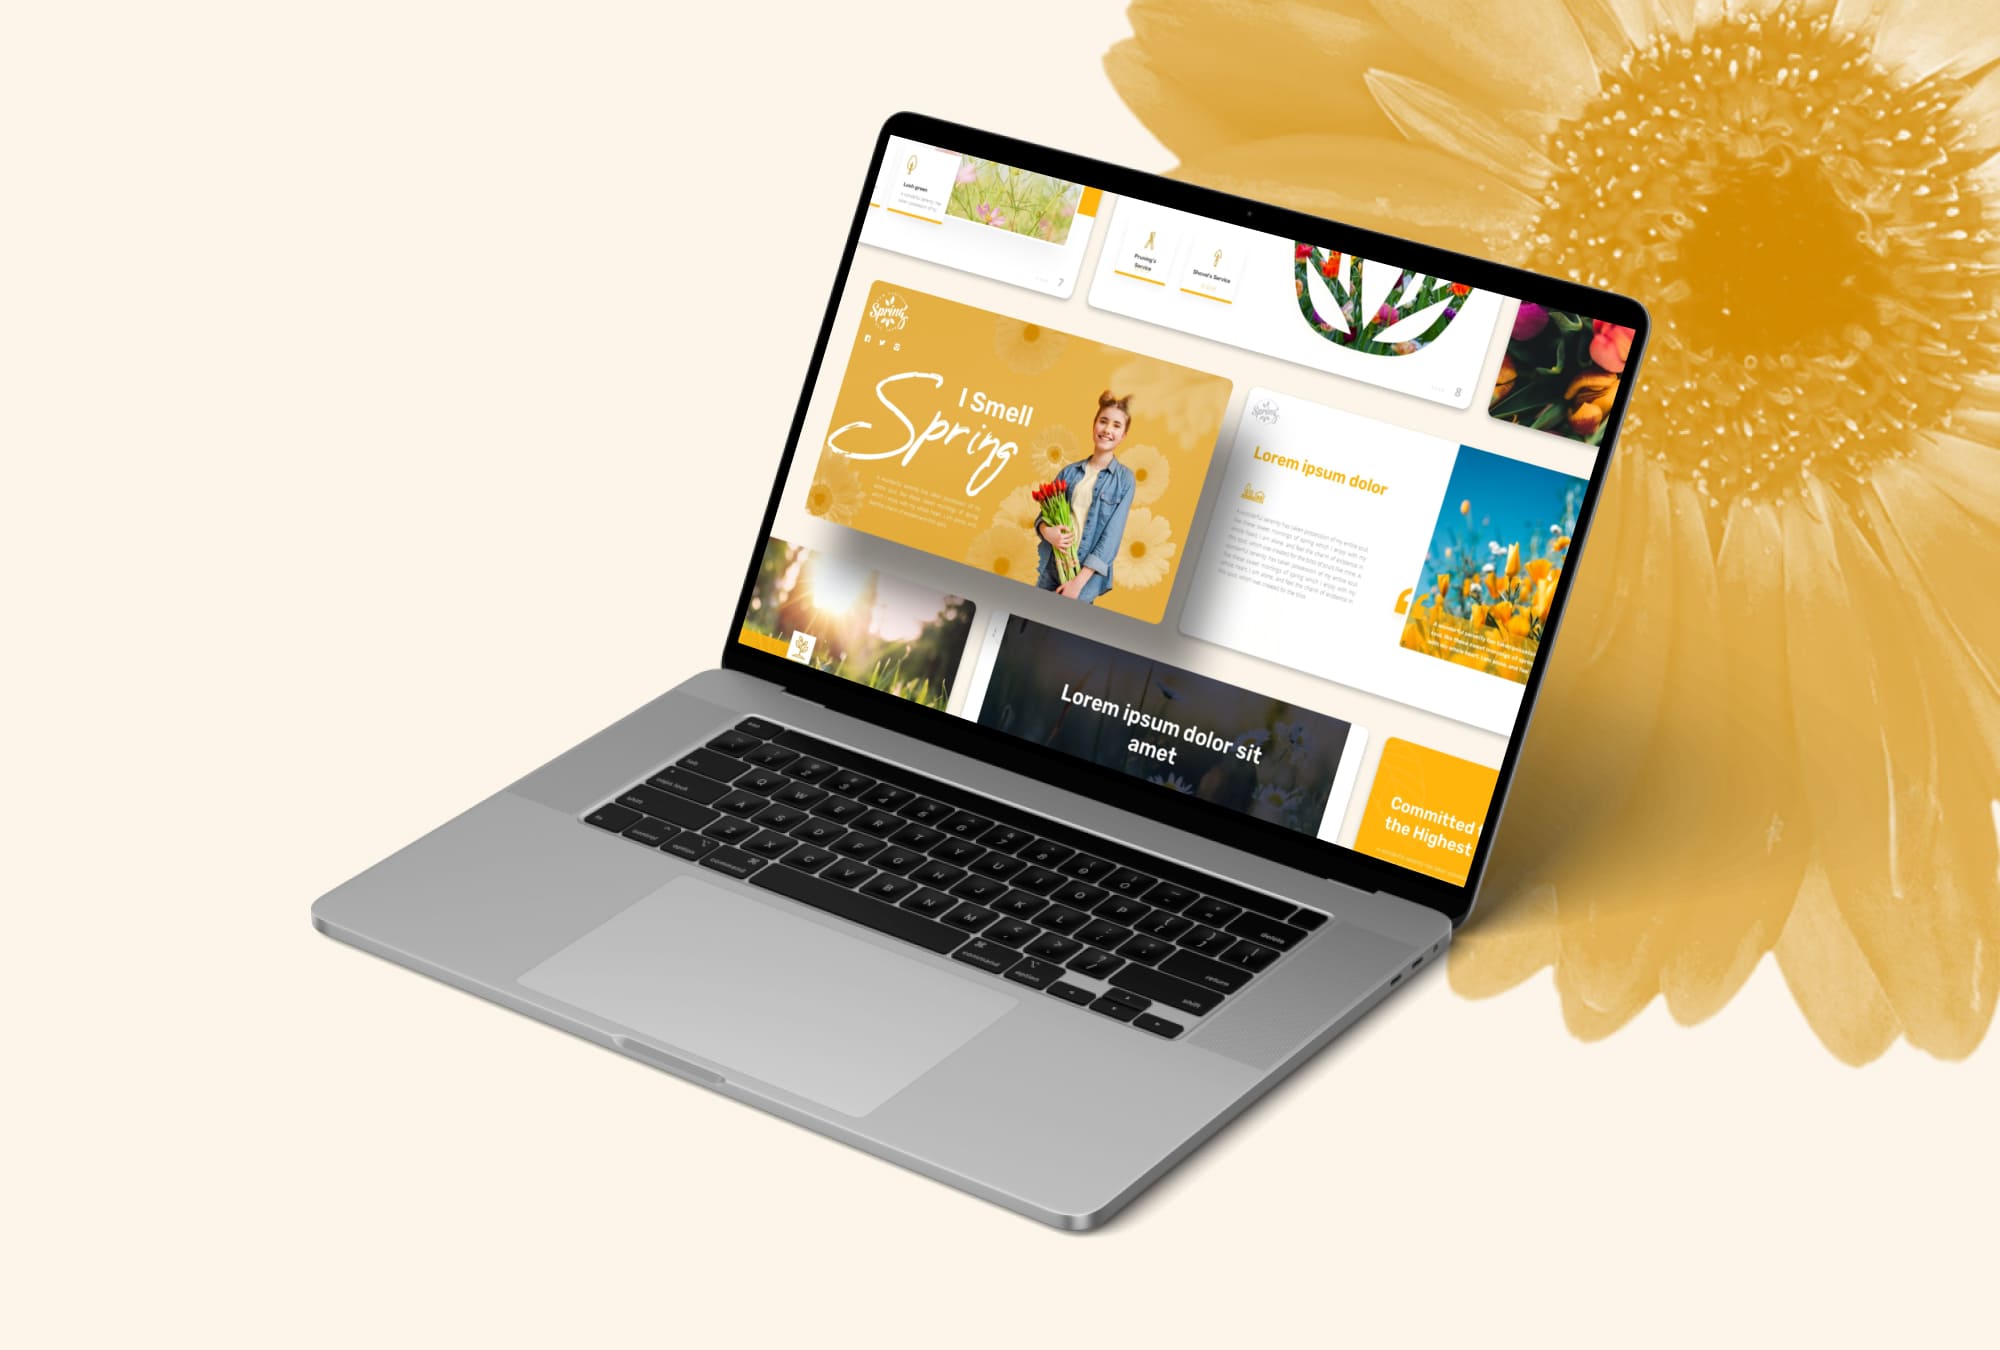 Pack of images of exquisite presentation slides on the theme of spring on a laptop screen.